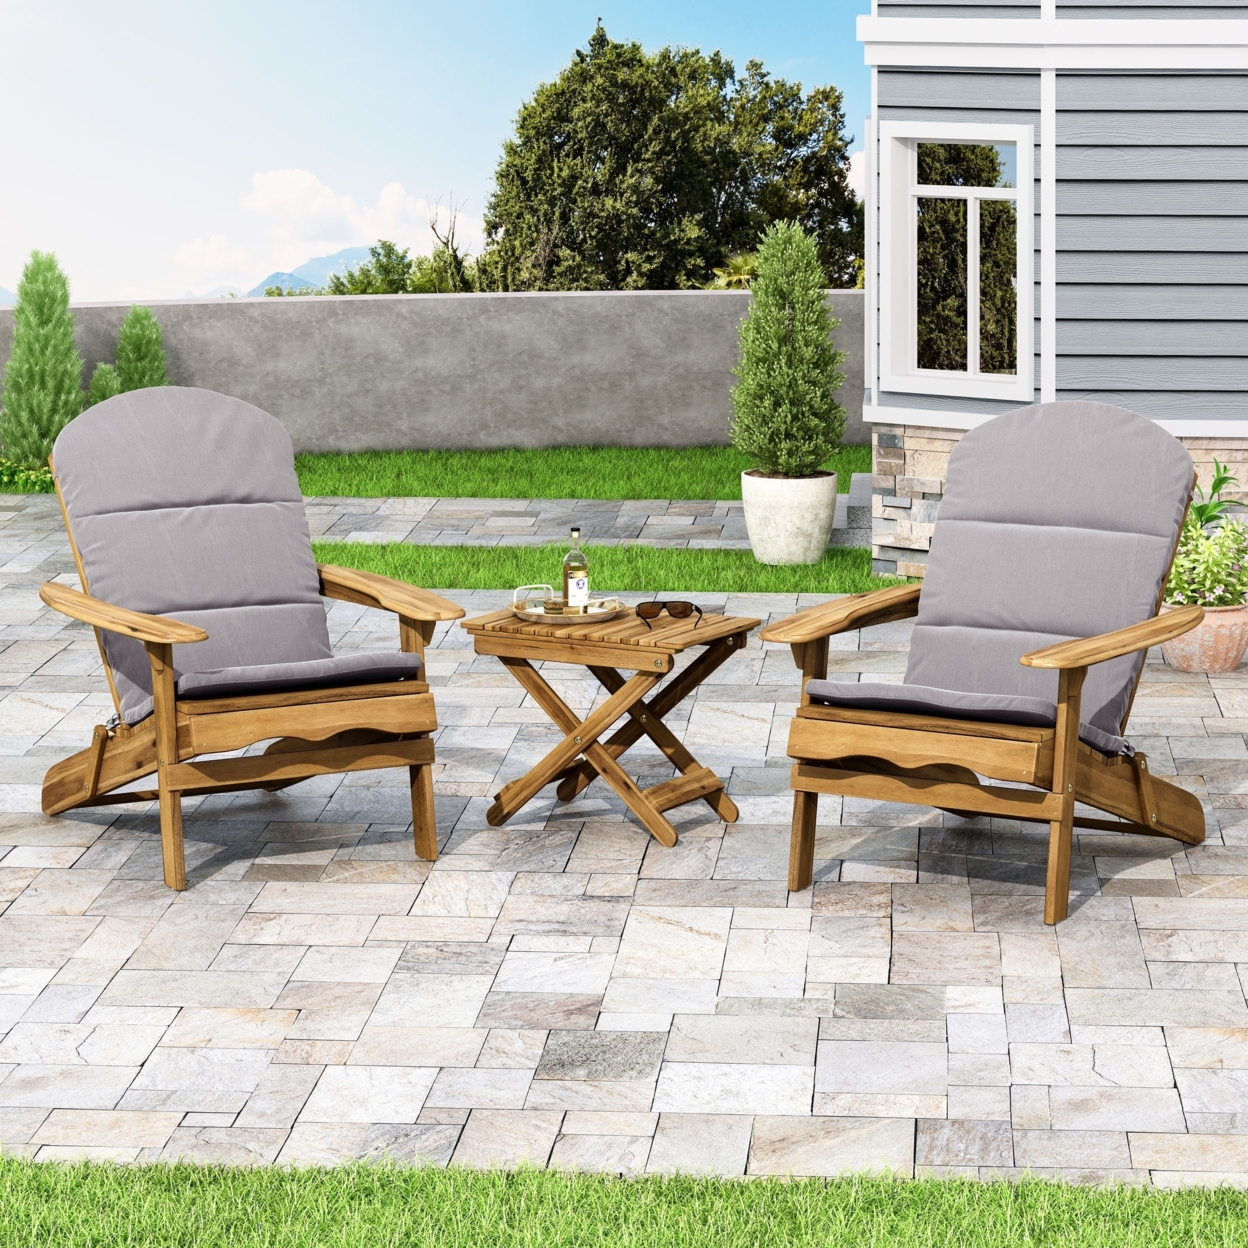 Reed Outdoor 2 Seater Acacia Wood Chat Set With Water Resistant Cushions - Natural/gray